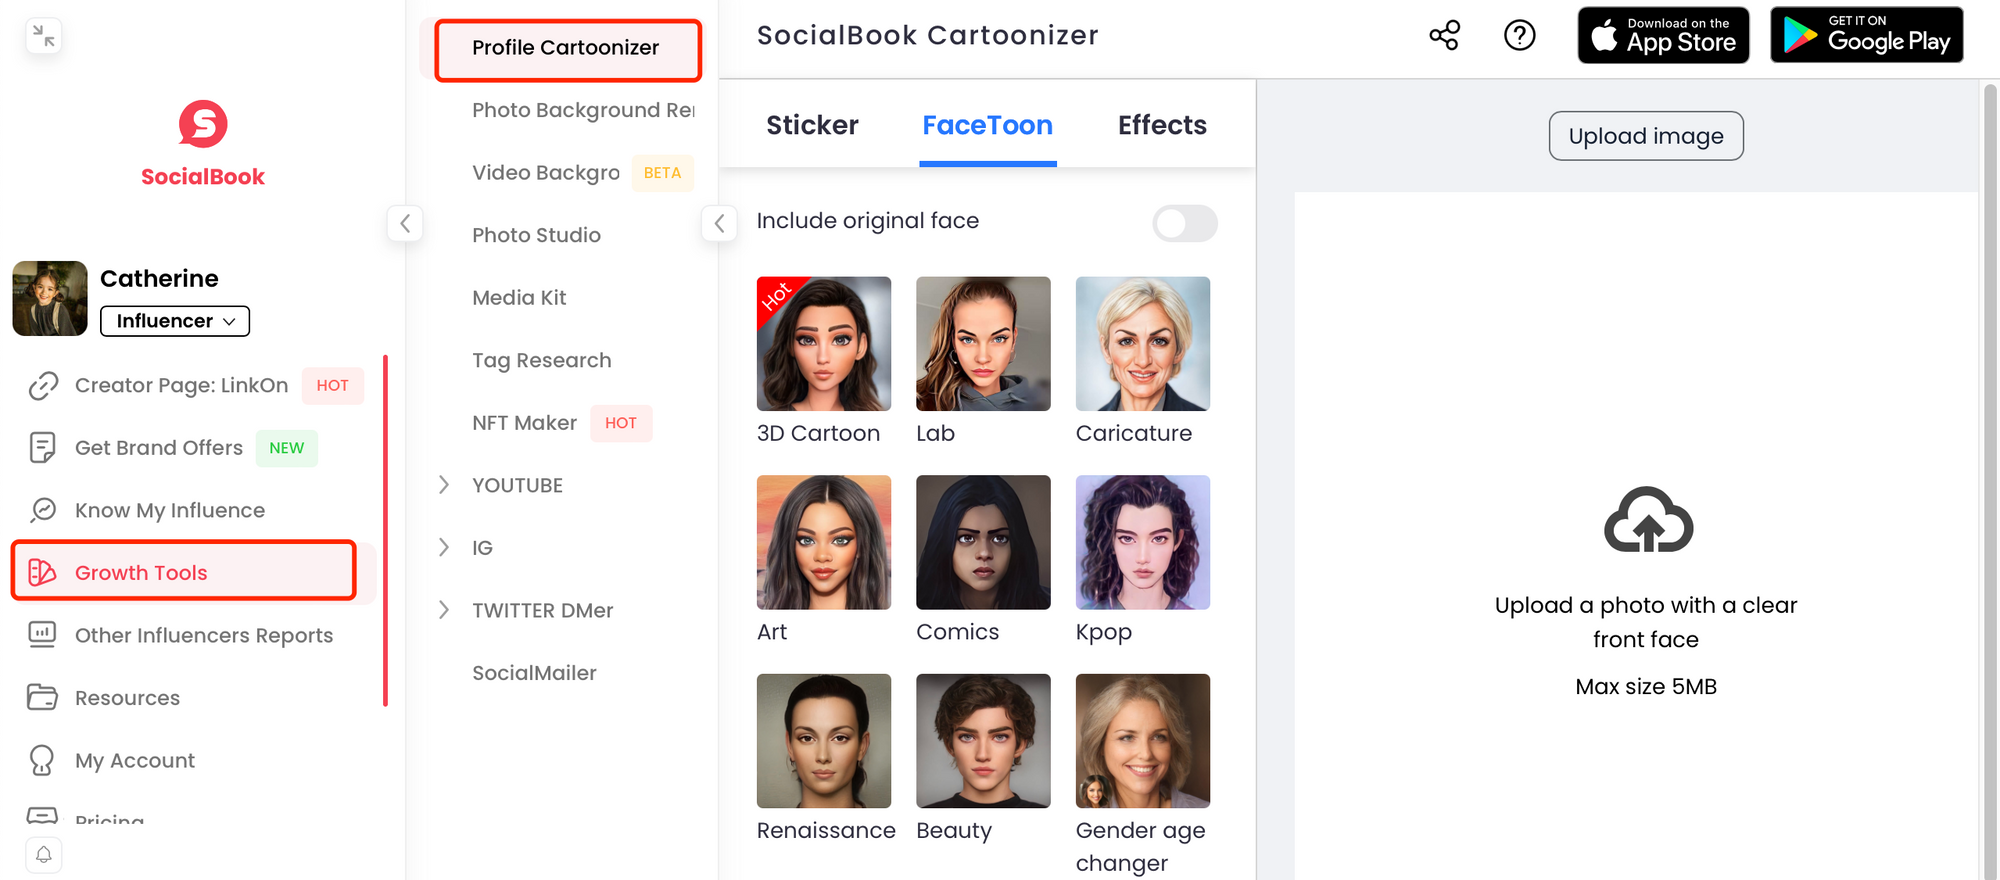 Pick up Cartoonizer from the Growth Tools Menu